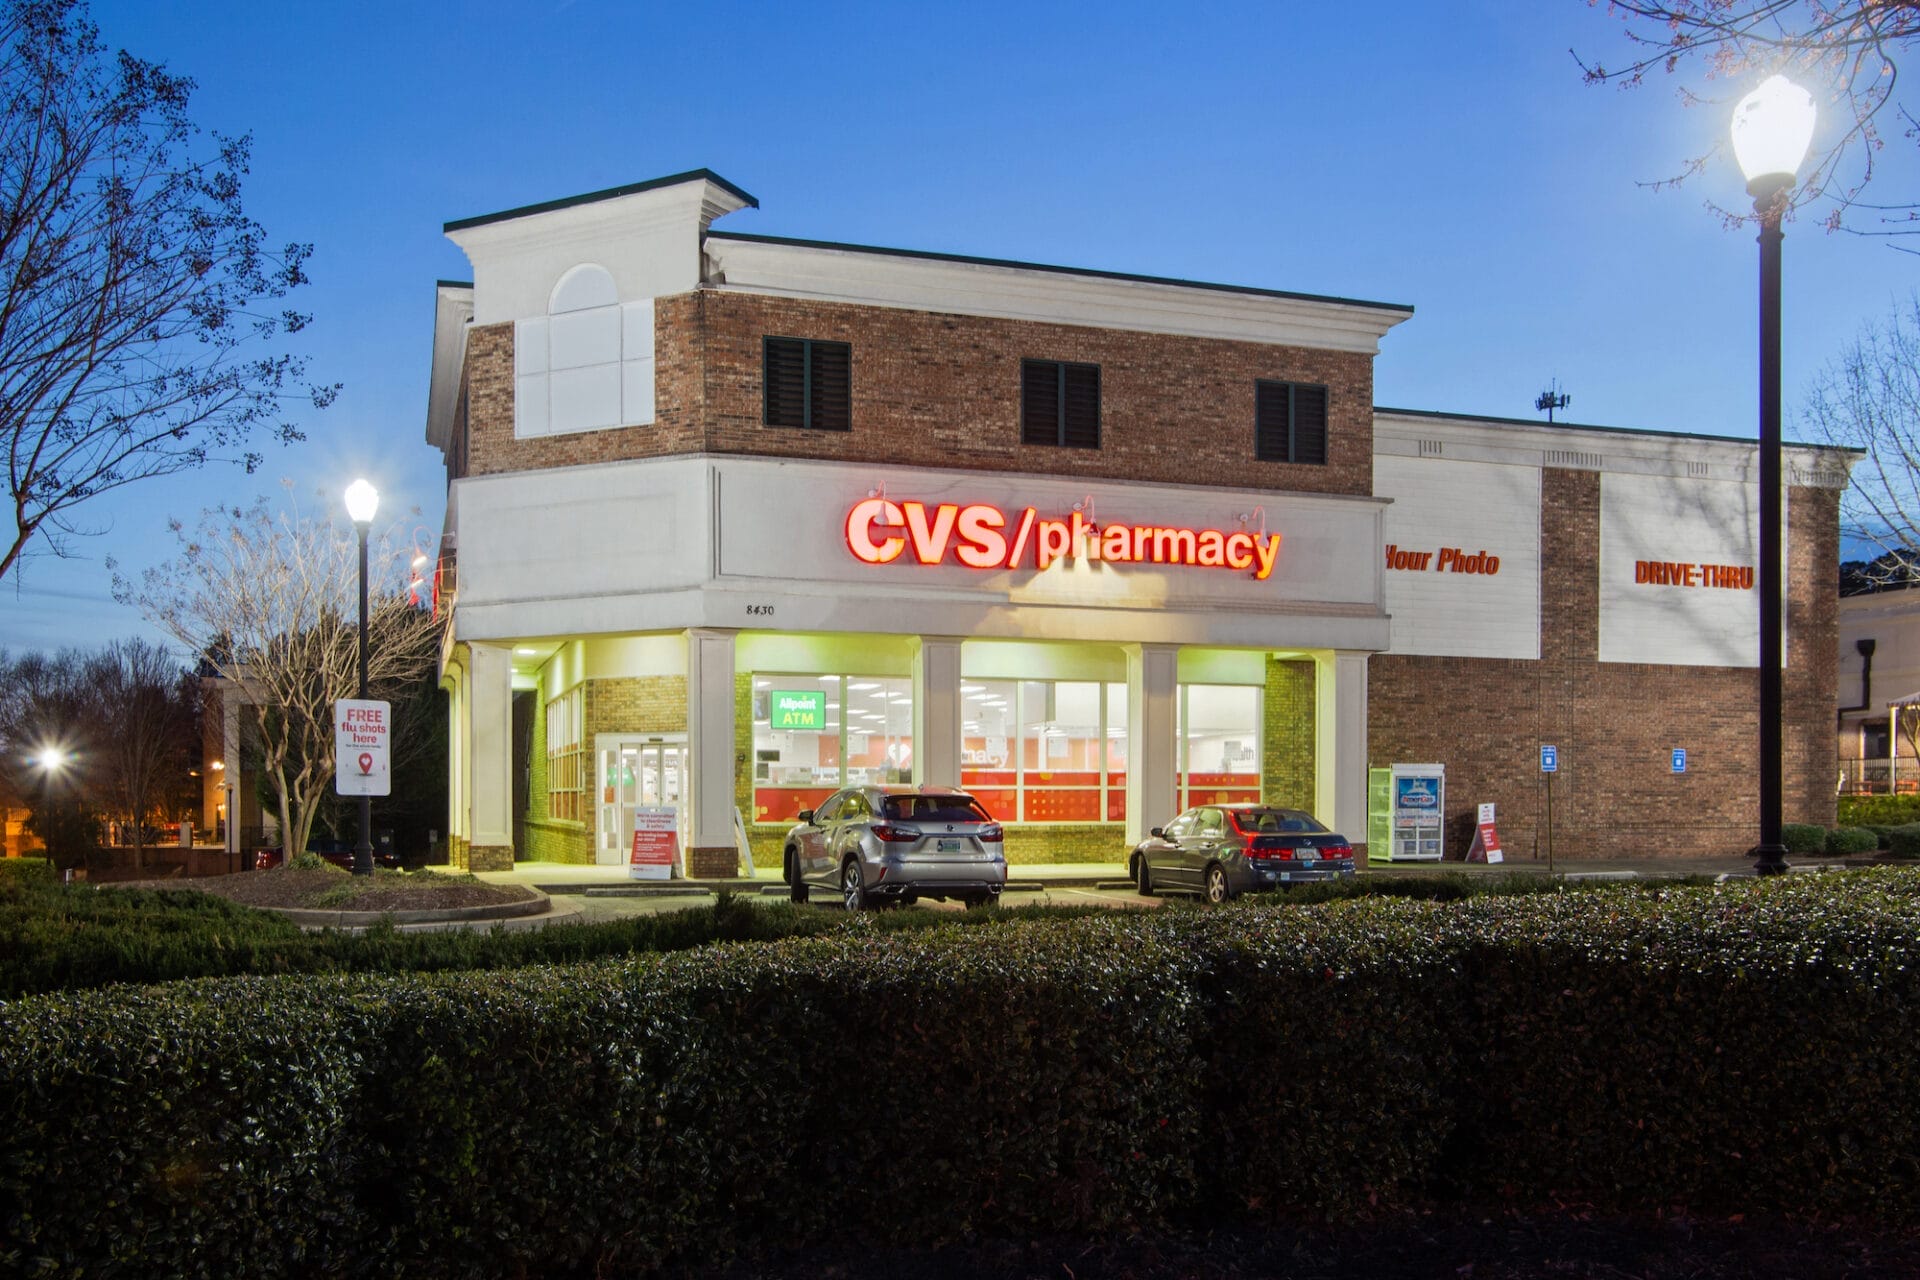 Exterior of a recently sold CVS Pharmacy store in Alpharetta, GA at twilight, illuminated by streetlights, with cars parked in front.